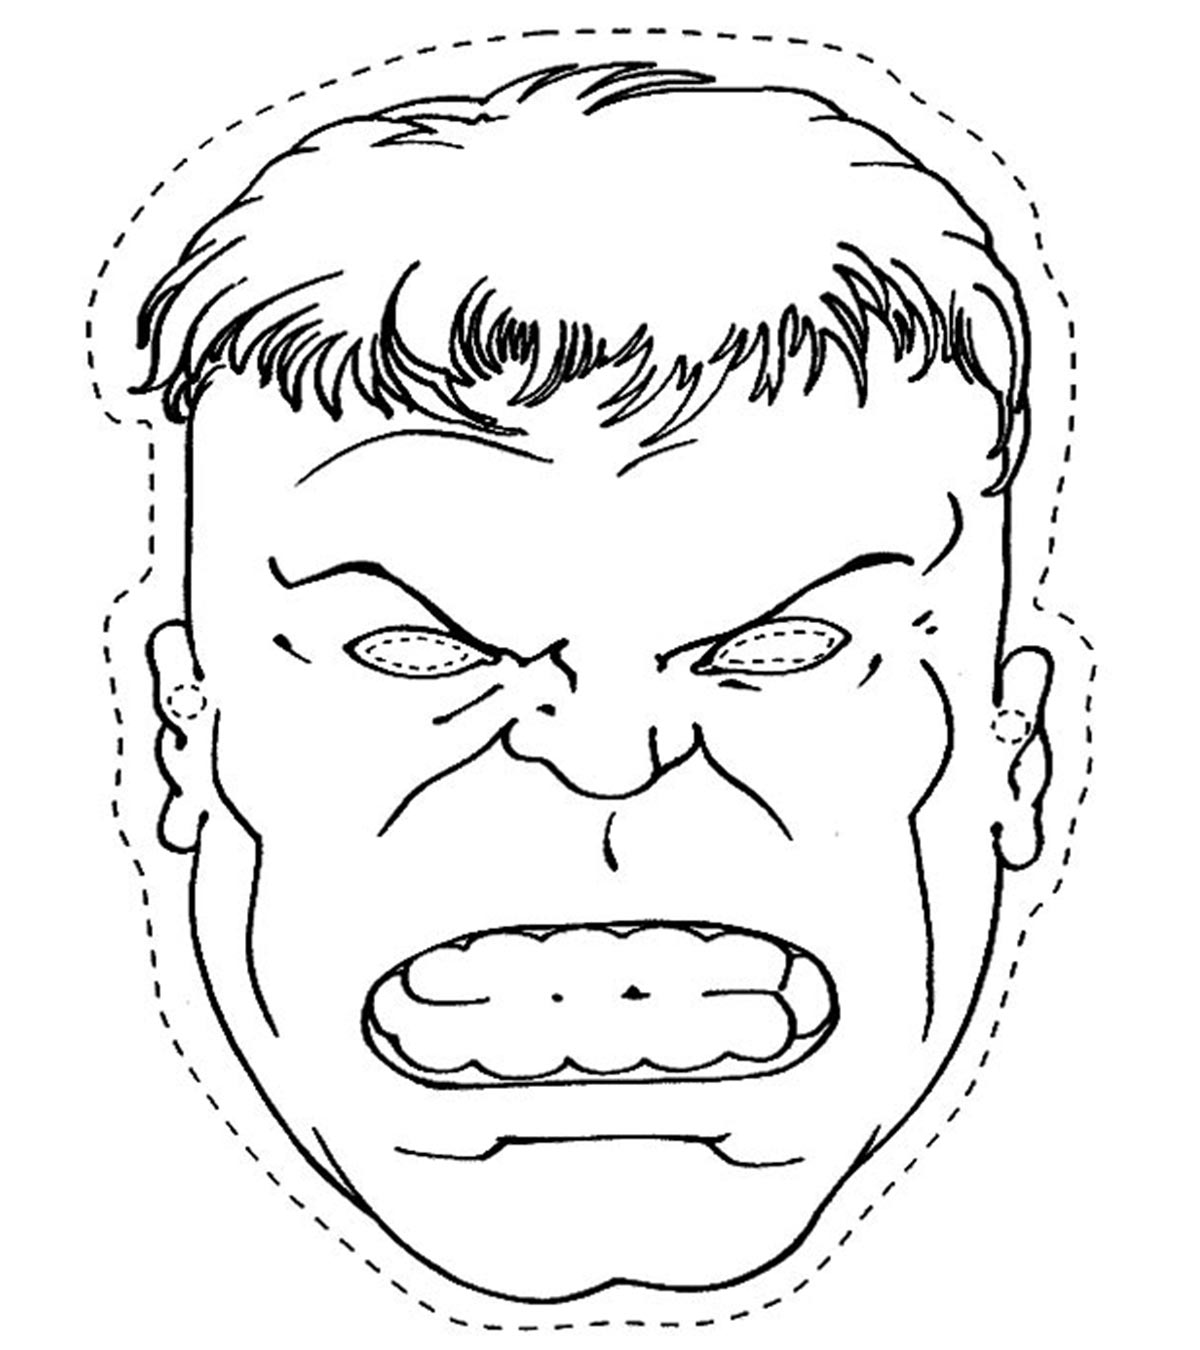 Coloring pages incredible hulk coloring pages for toddle